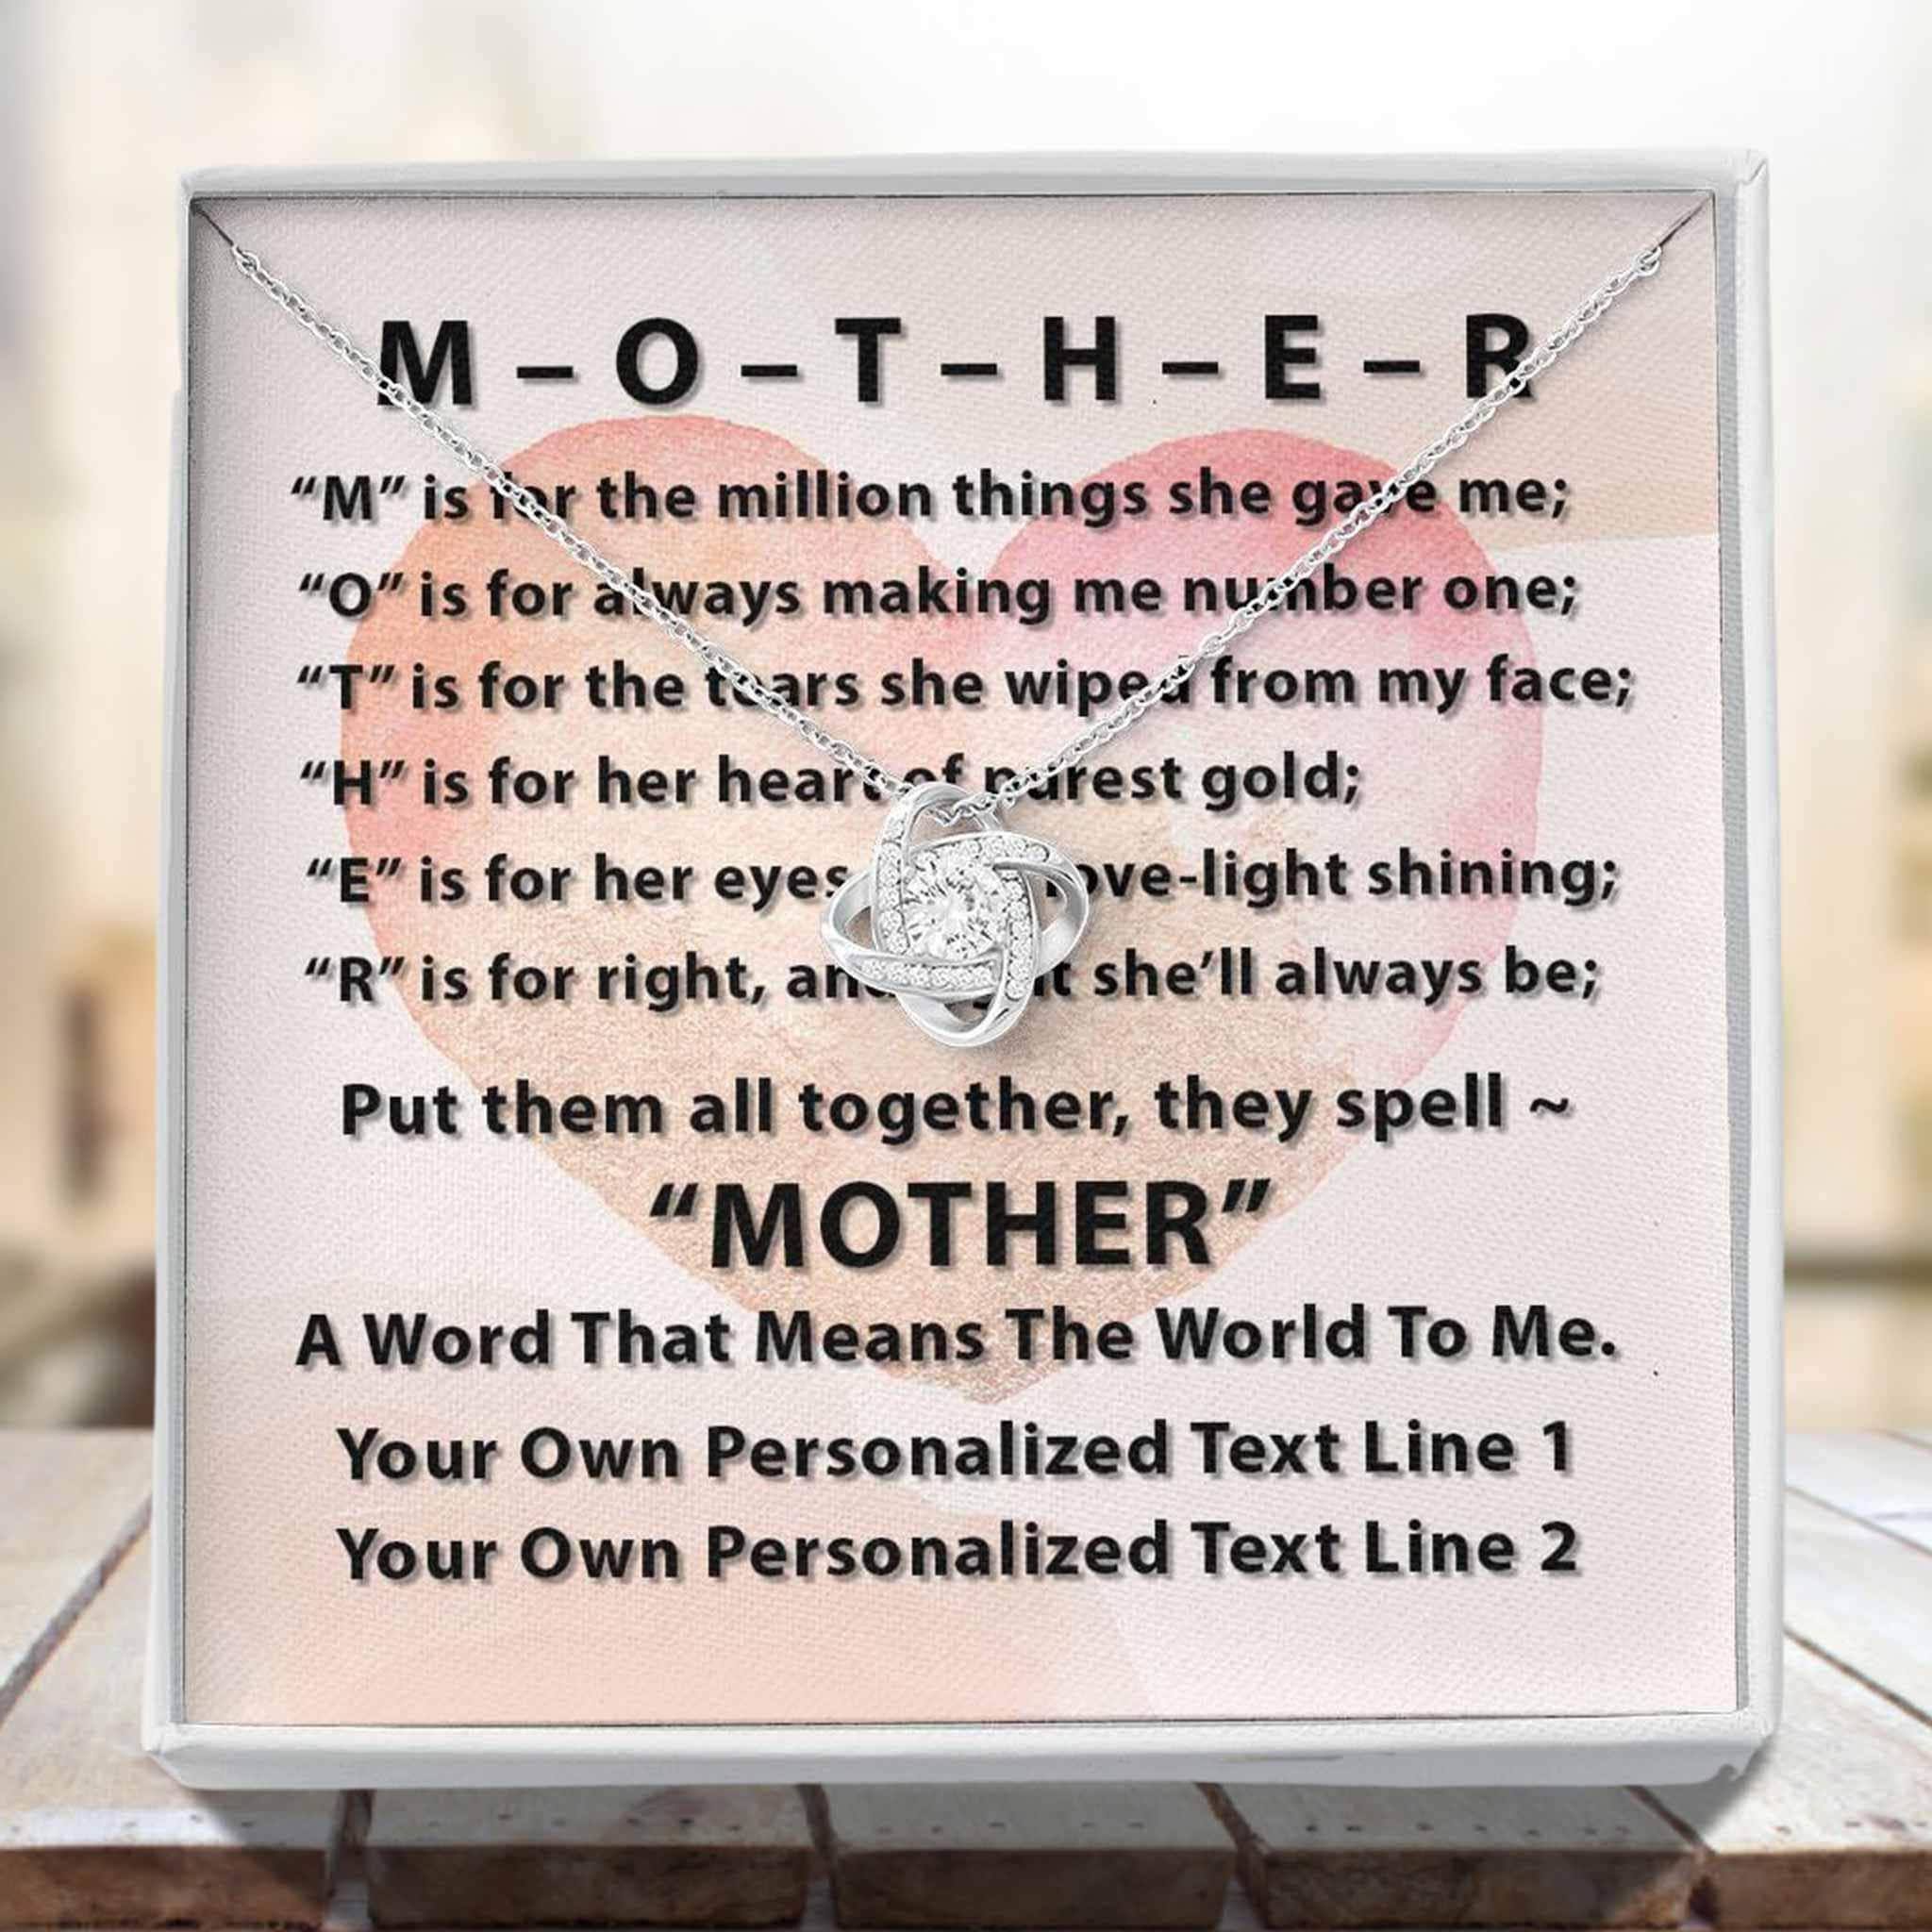 Love Knot Necklace With M-O-T-H-E-R Poem Personalized Insert CardCustomly Gifts